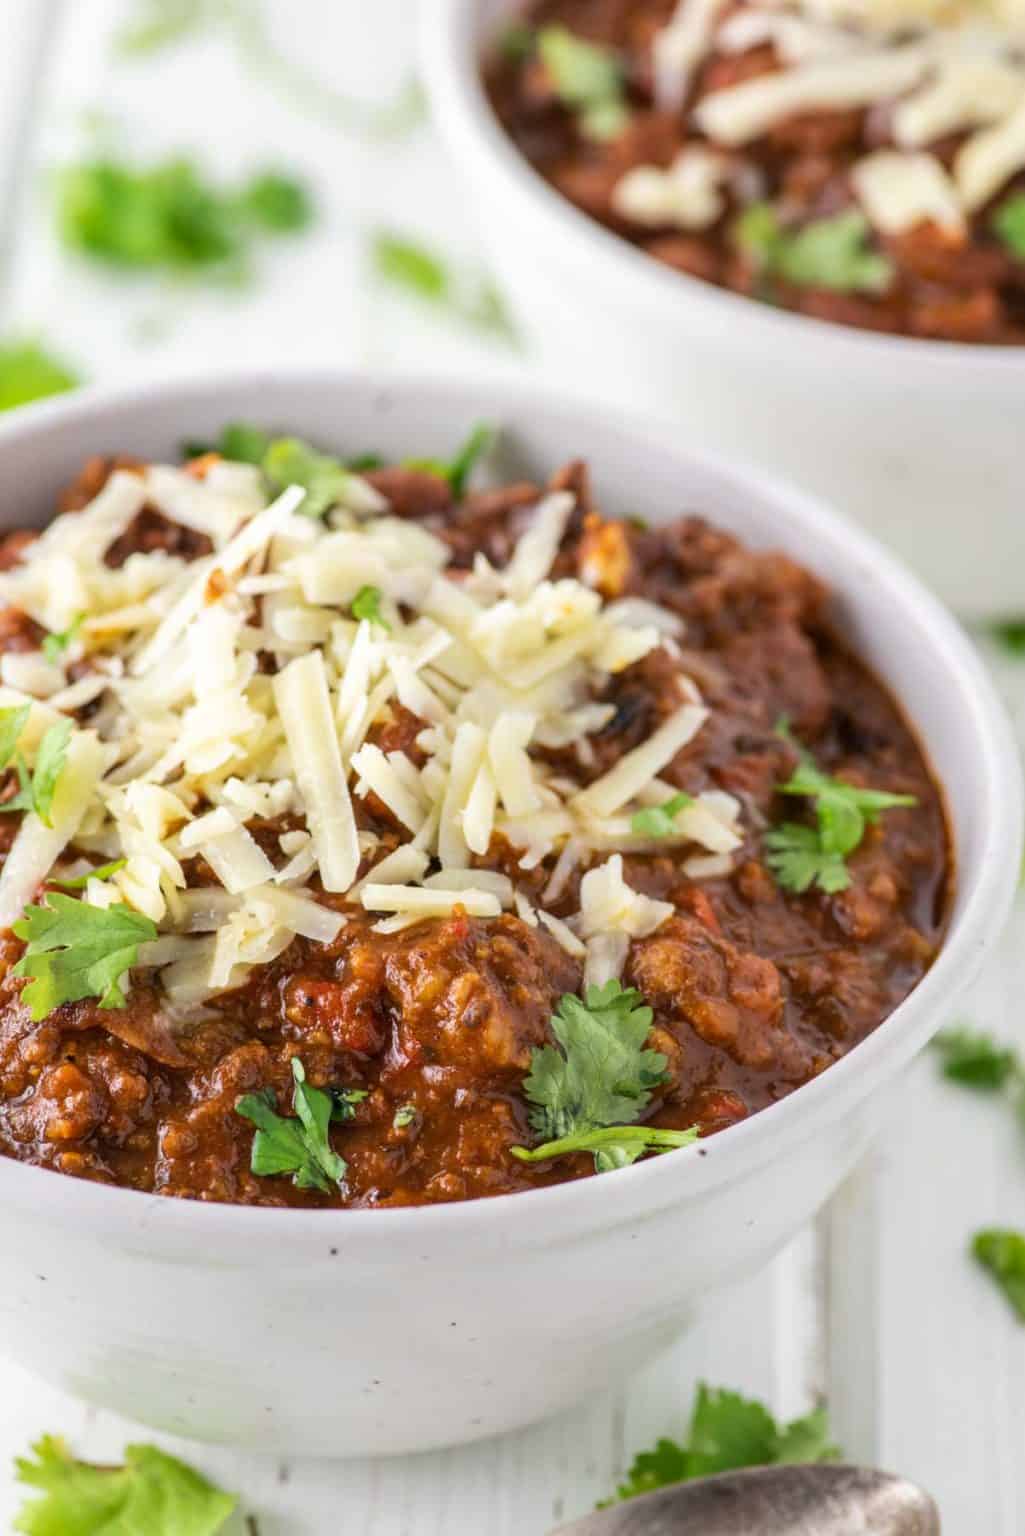 Southern Homemade Chili Recipe - The Best Out There - Chisel & Fork